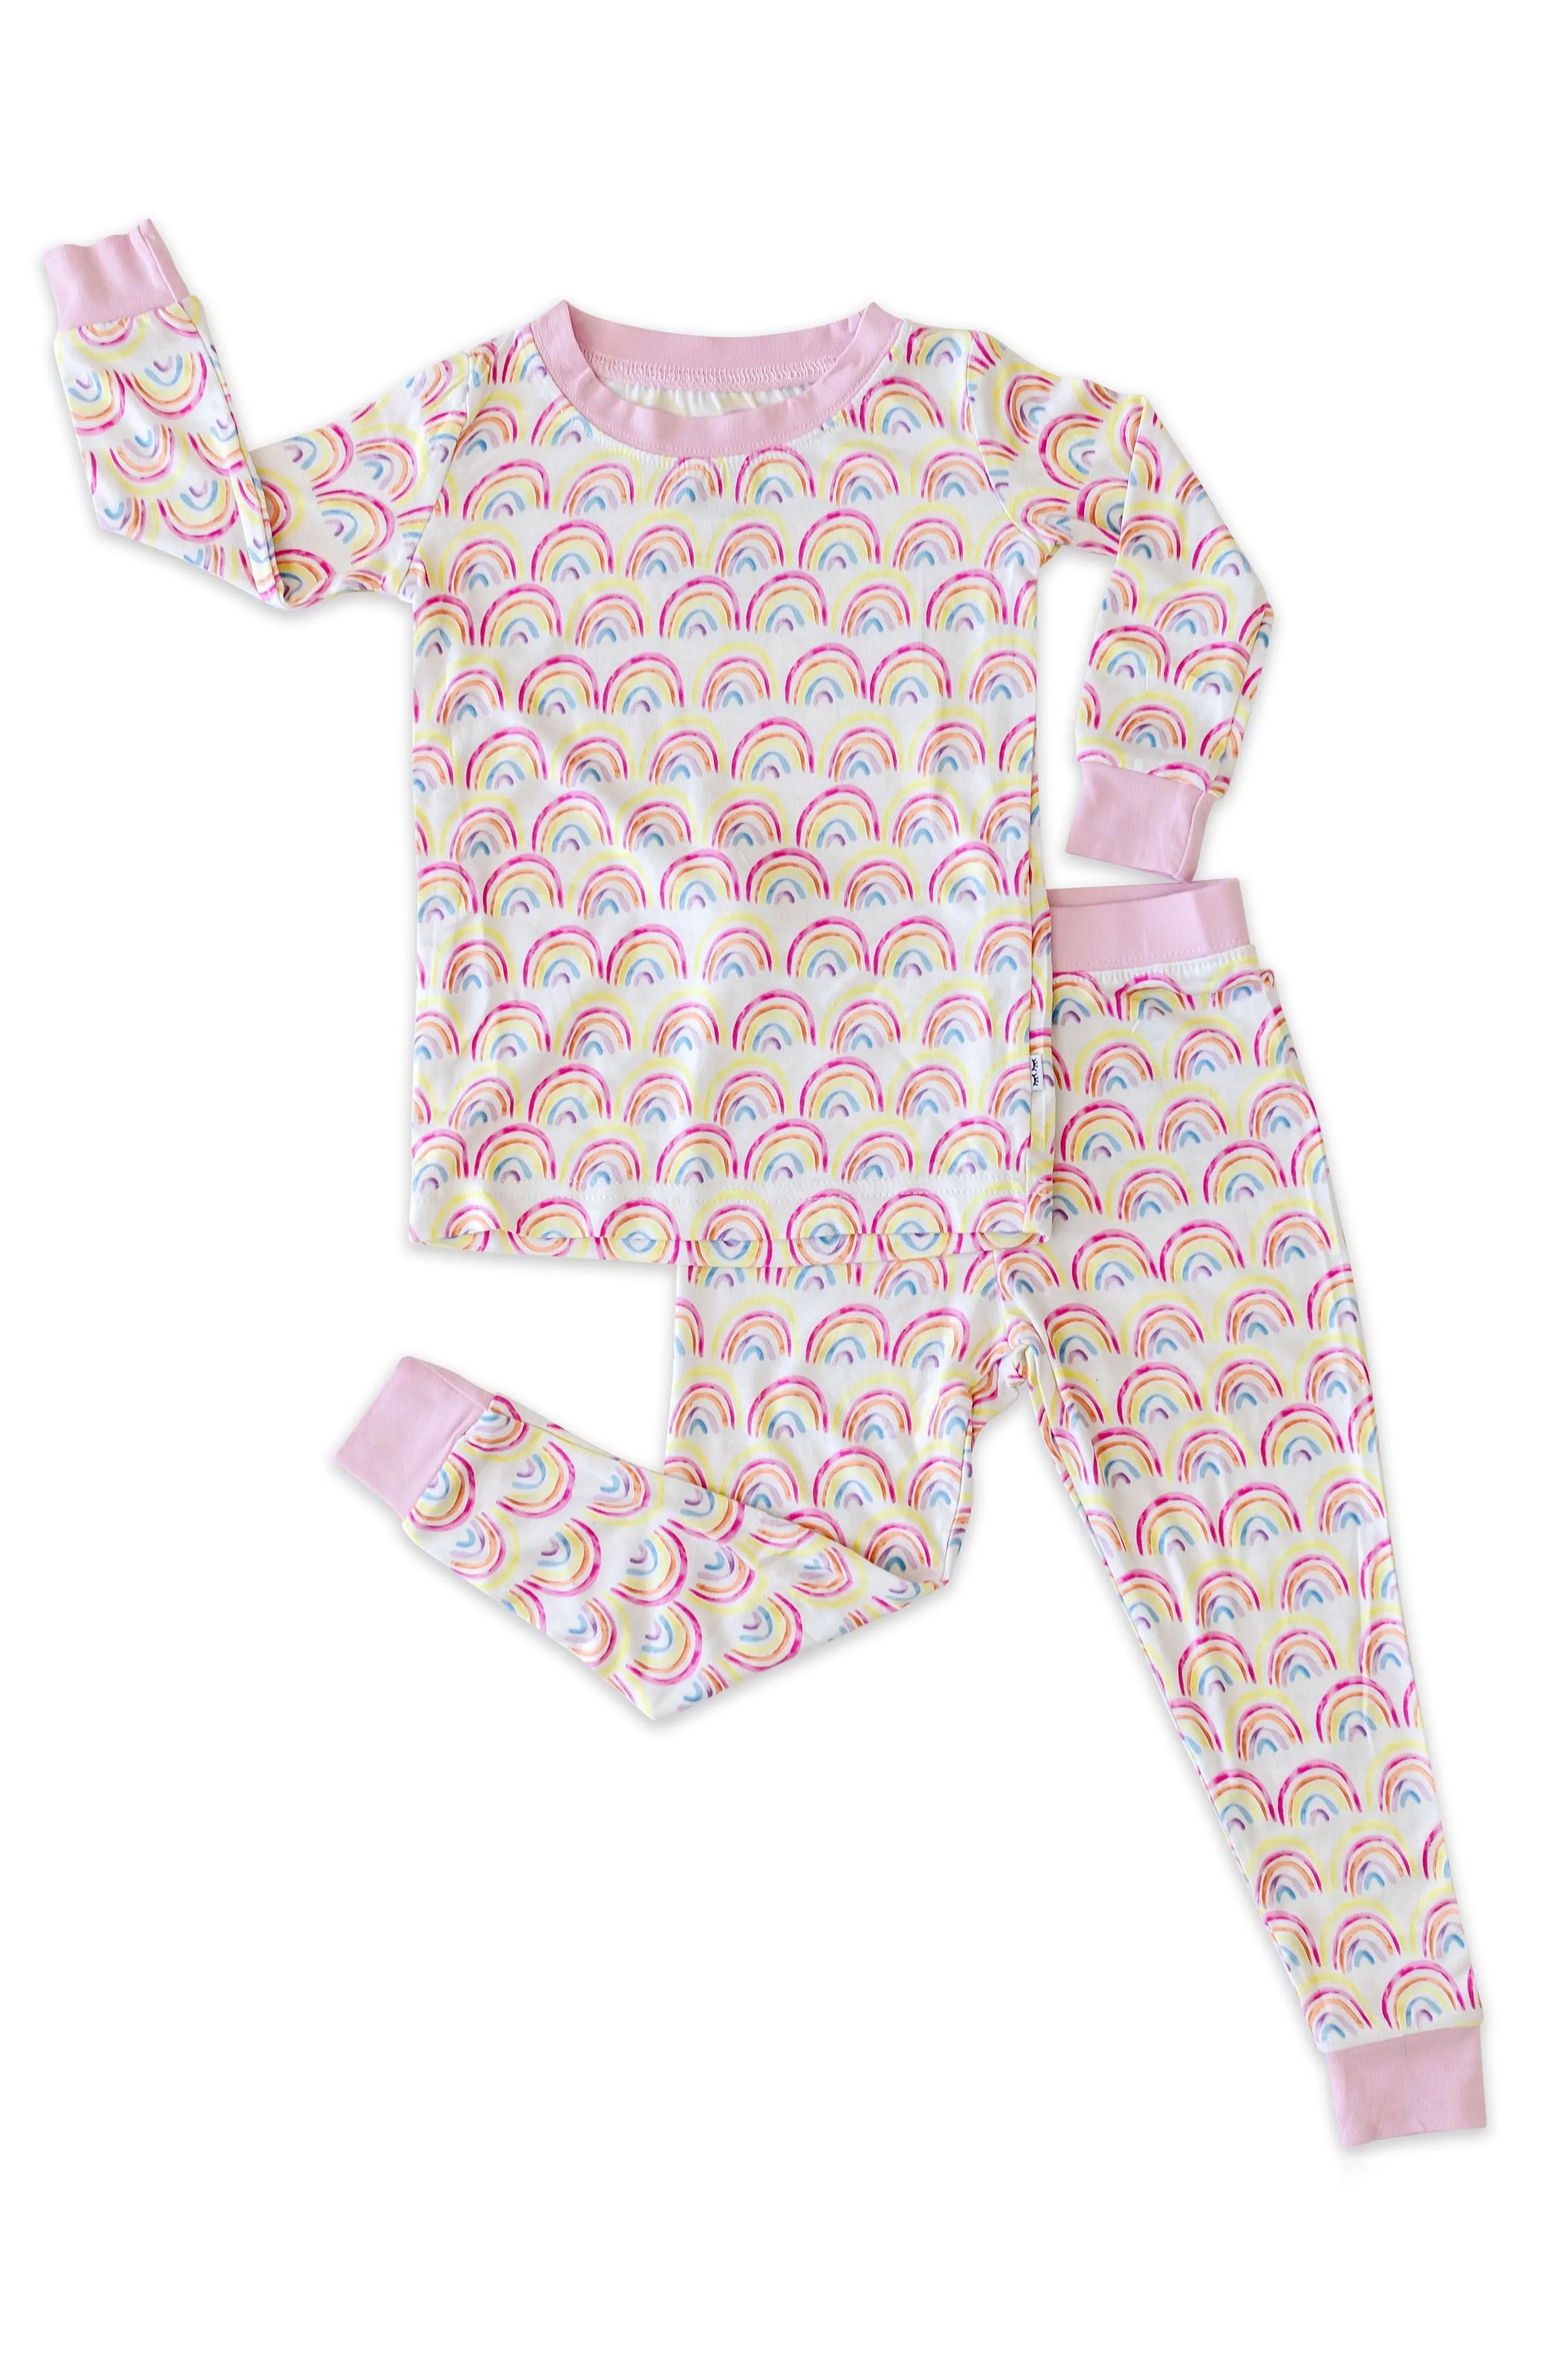 Toddler Girl's Little Sleepies Rainbows Fitted Two-Piece Pajamas, Size 3T - Pink | Nordstrom